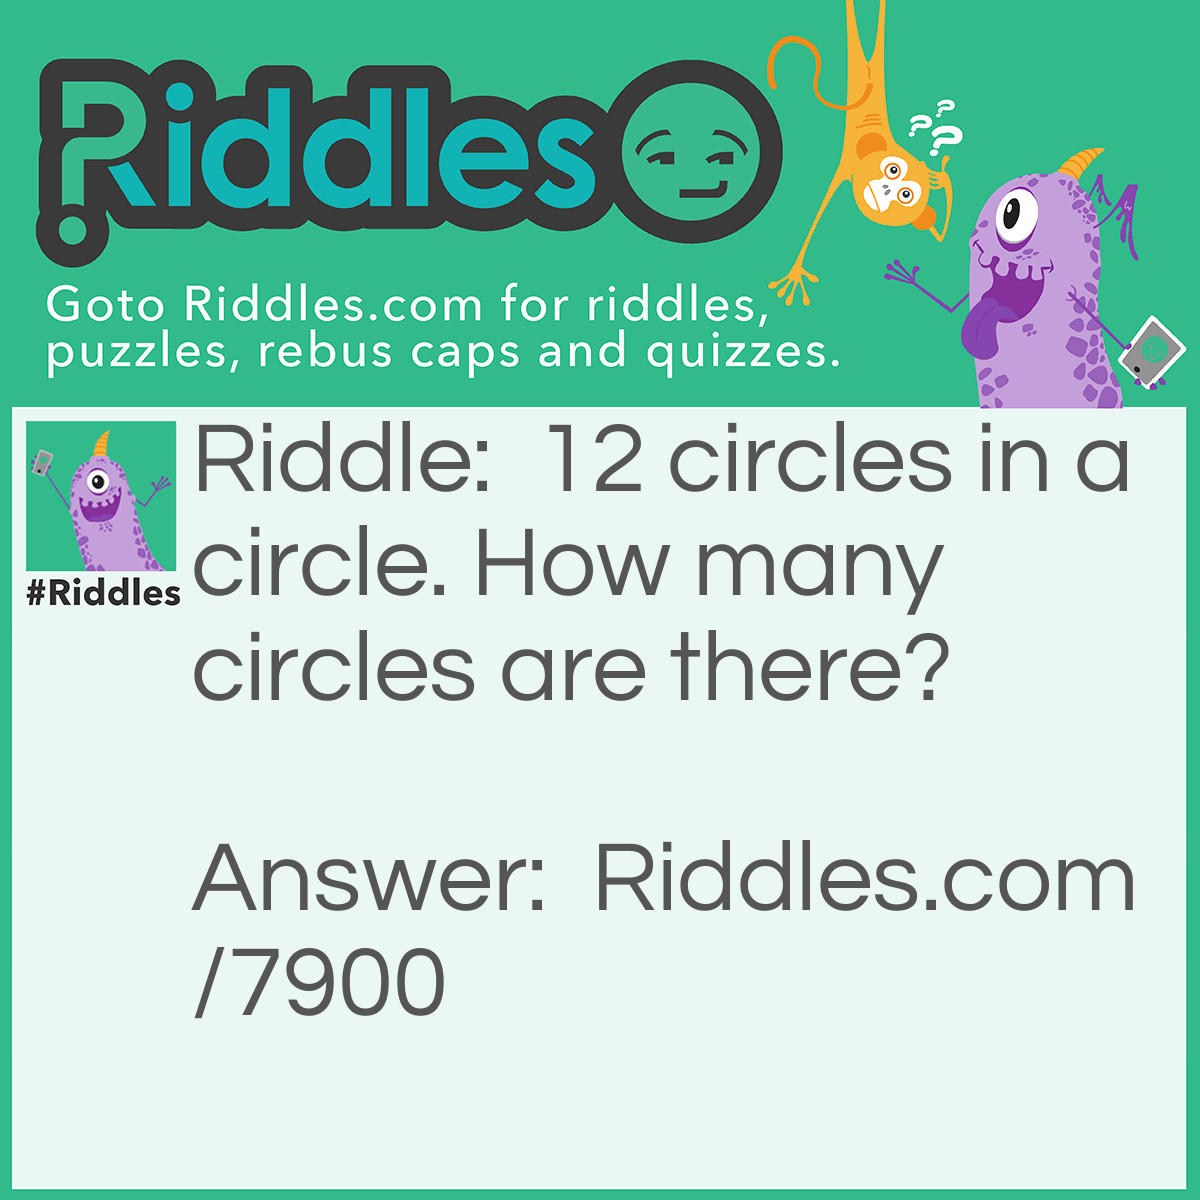 Riddle: 12 circles in a circle. How many circles are there? Answer: 13 (12 in a circle/1circle)